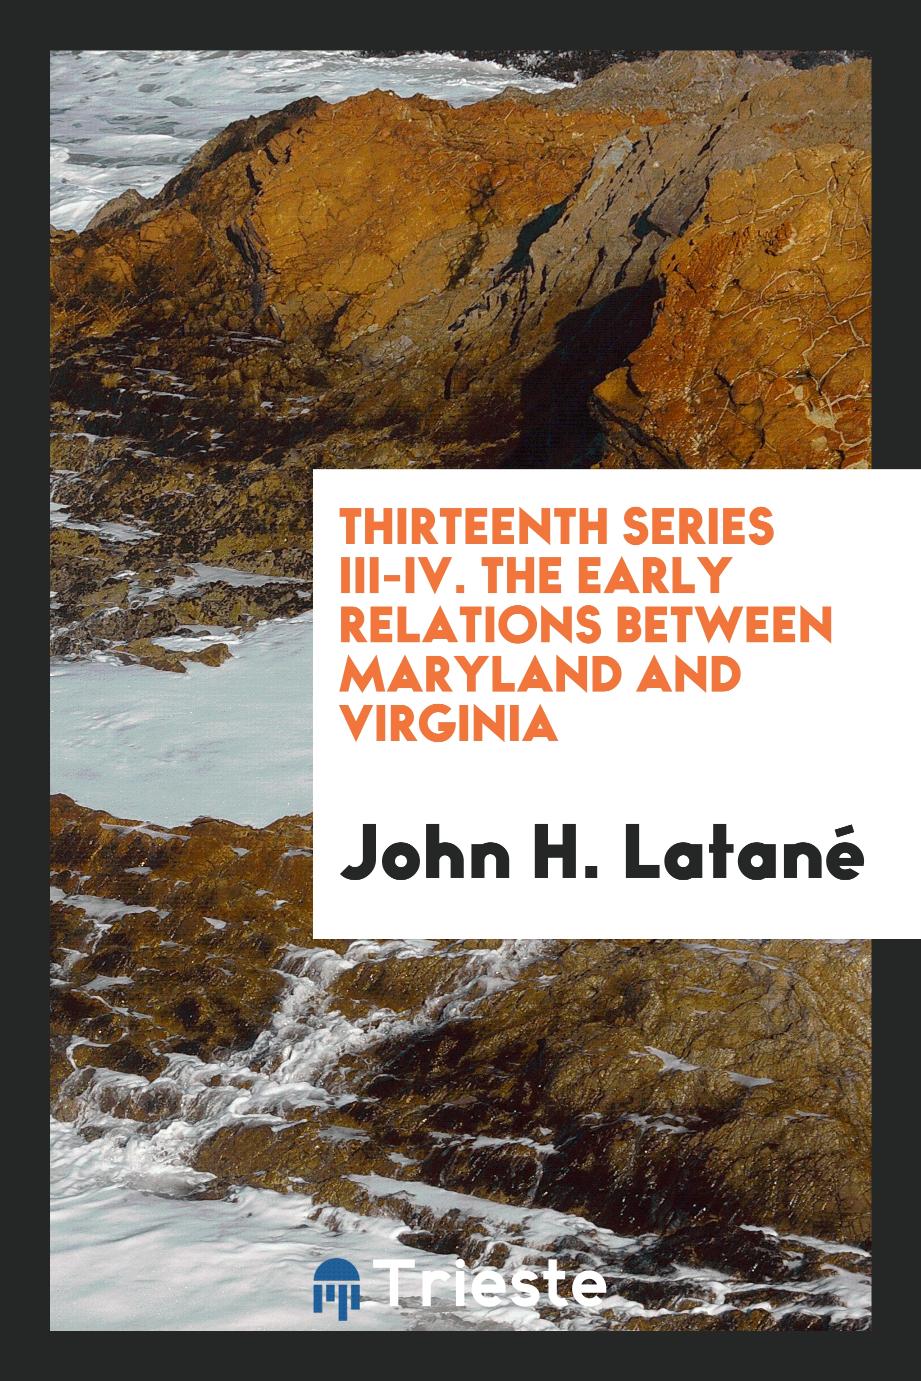 Thirteenth series III-IV. The Early Relations Between Maryland and Virginia